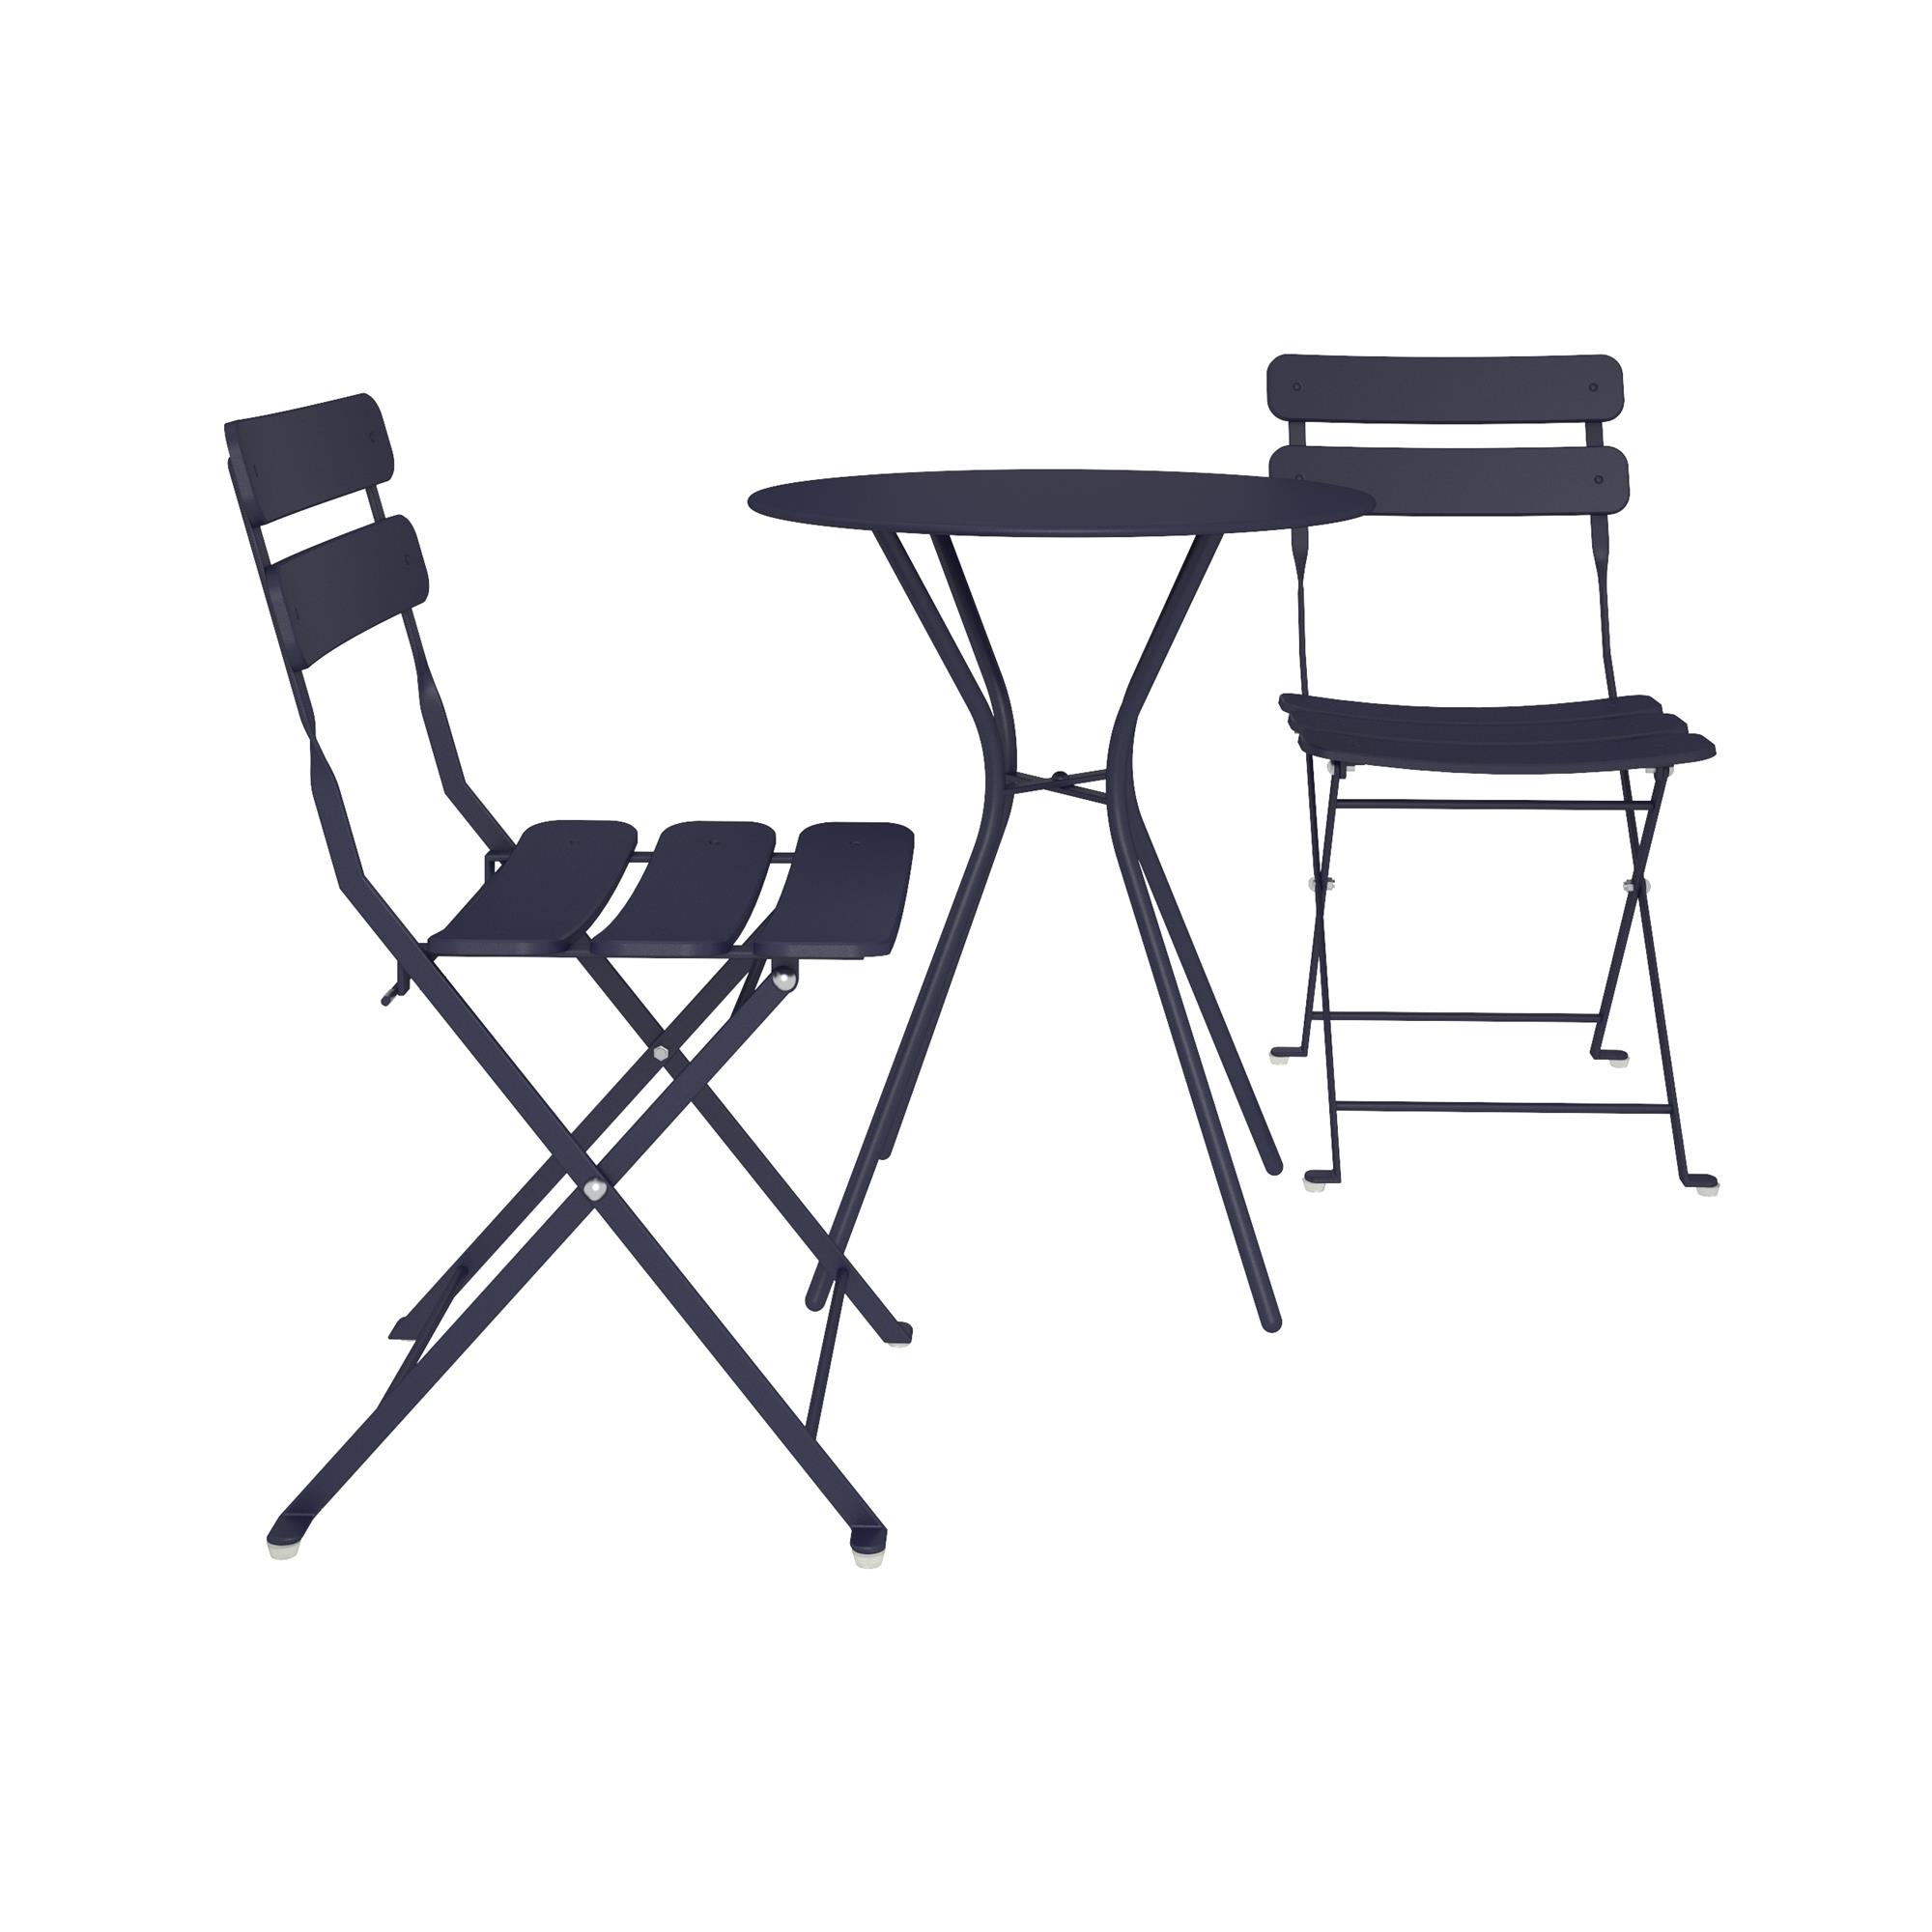 COSCO Outdoor Living, 3 Piece Bistro Set with 2 Folding Chairs, Navy - image 3 of 7